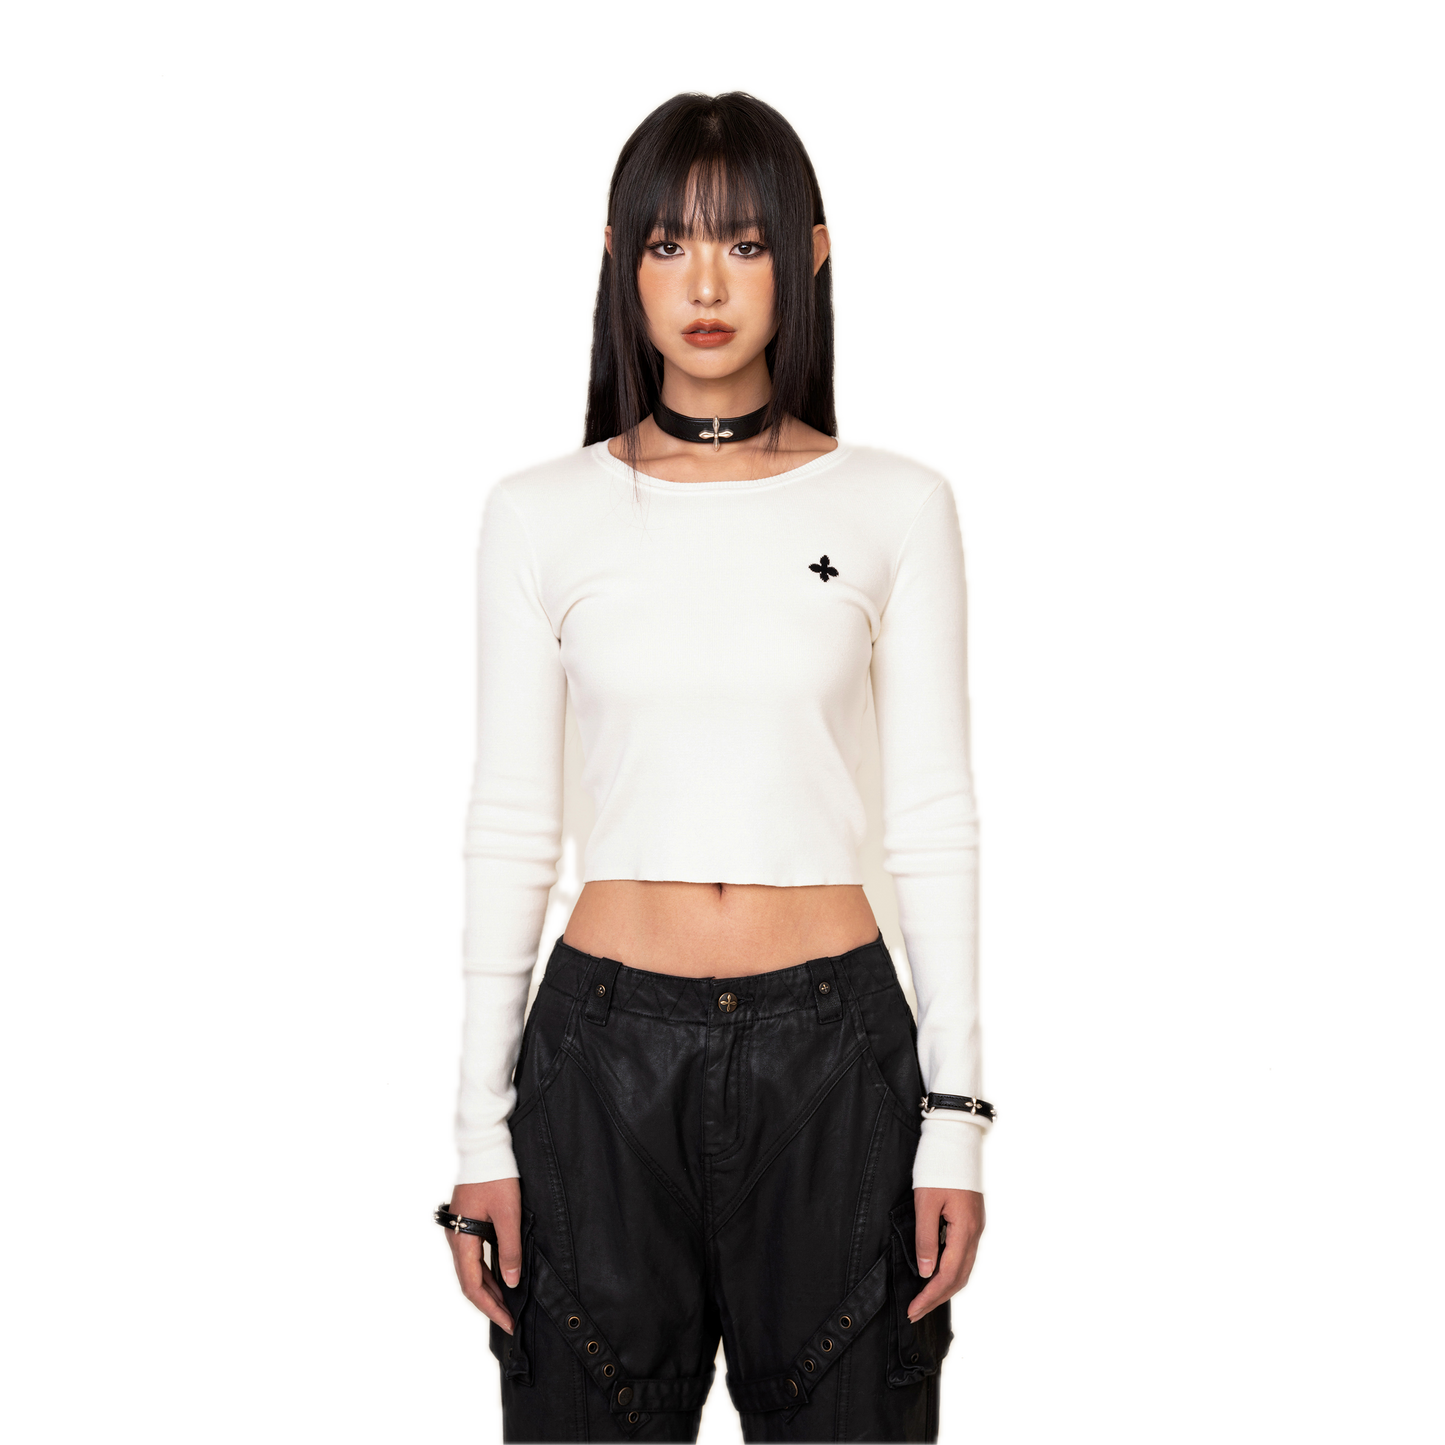 SMFK Compass Cross Classic Riding Knitted Top In White